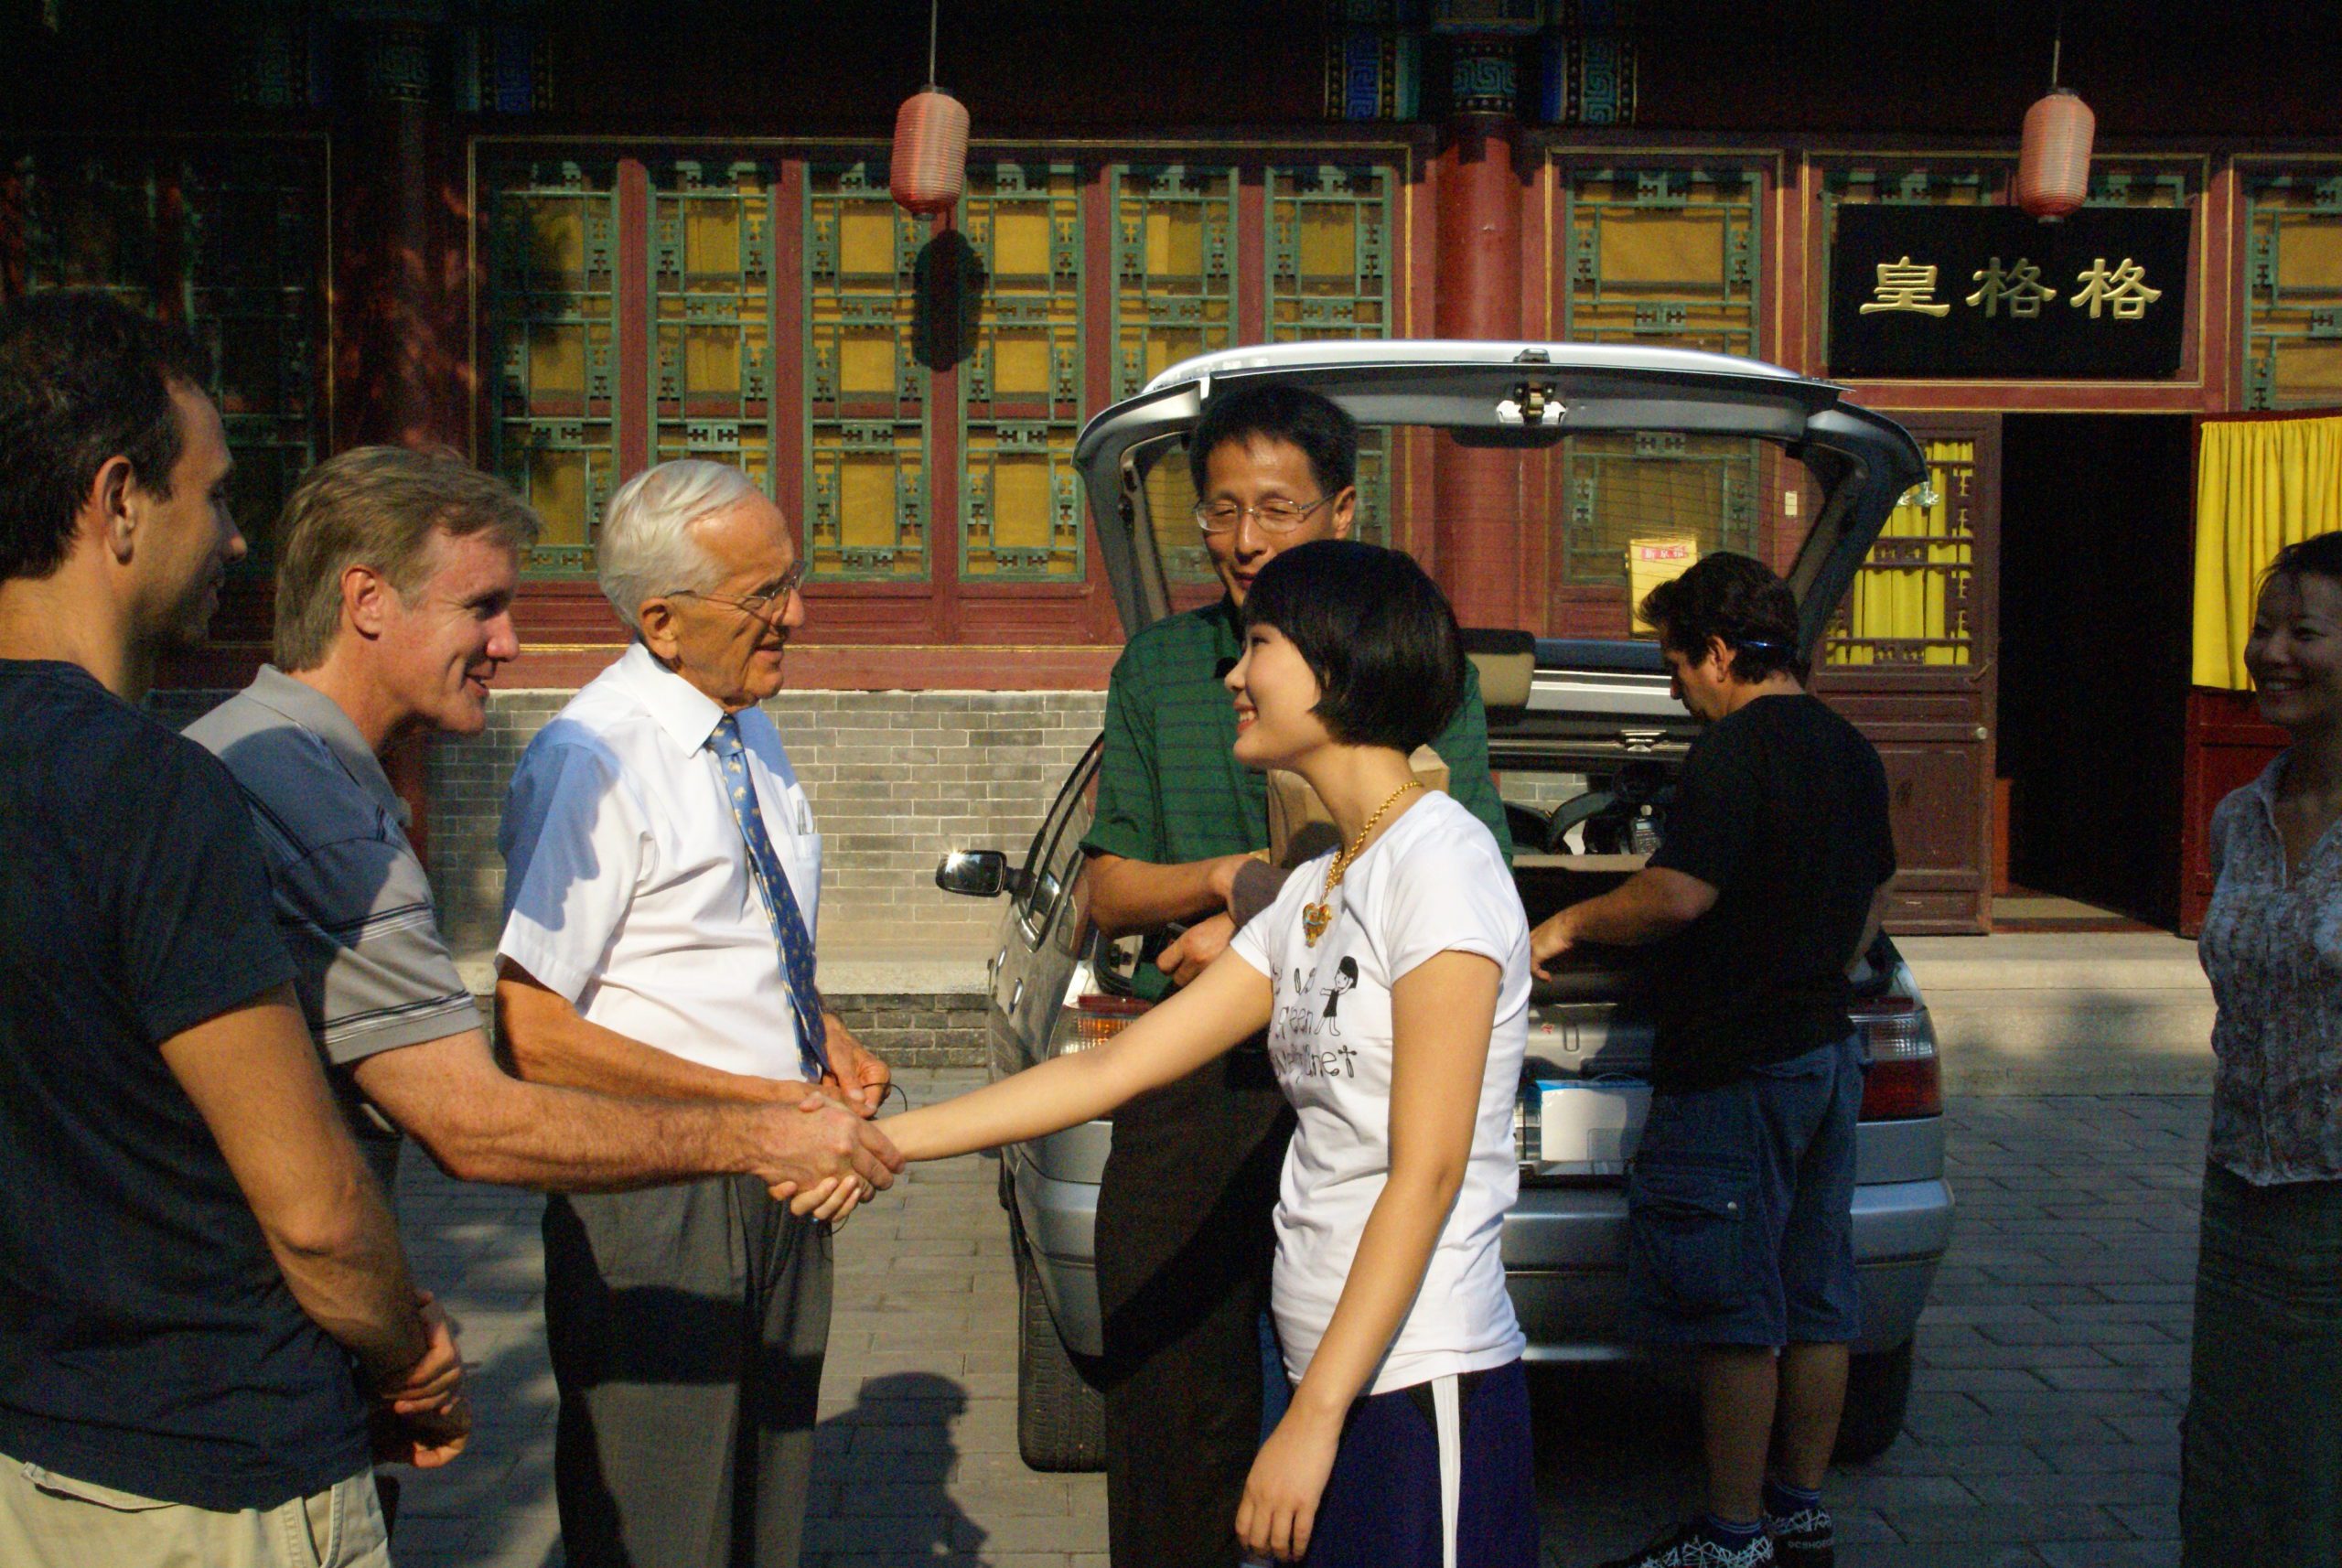 In Beijing, China, T. Colin Campbell and the Forks Over Knives crew meet fans of Campbell's The China Study